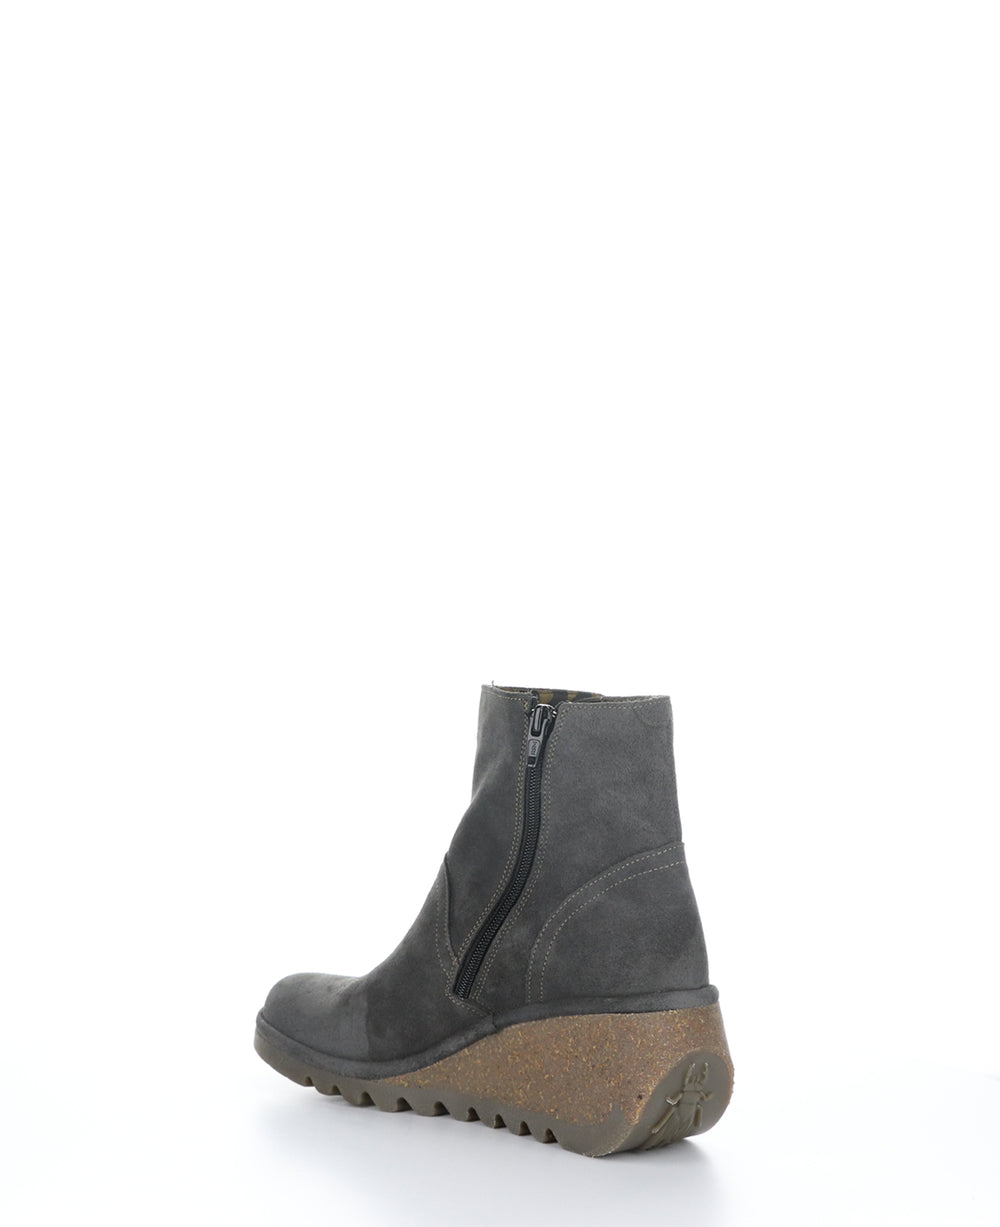 NERY336FLY Diesel Zip Up Ankle Boots|NERY336FLY Bottines avec Fermeture Zippée in Bleu